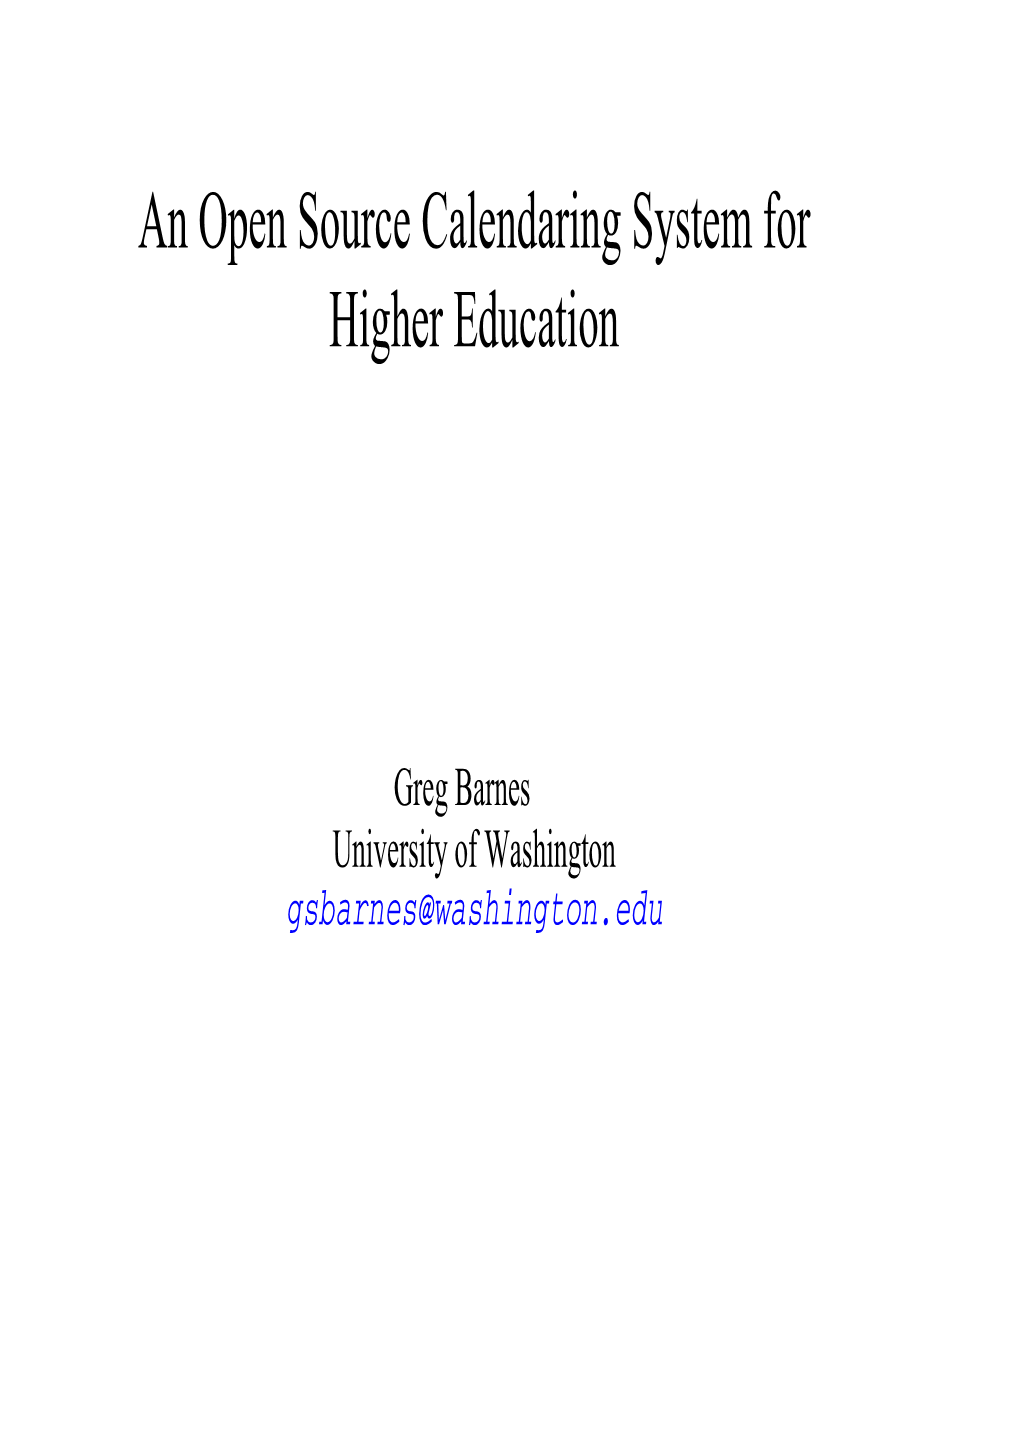 An Open Source Calendaring System for Higher Education